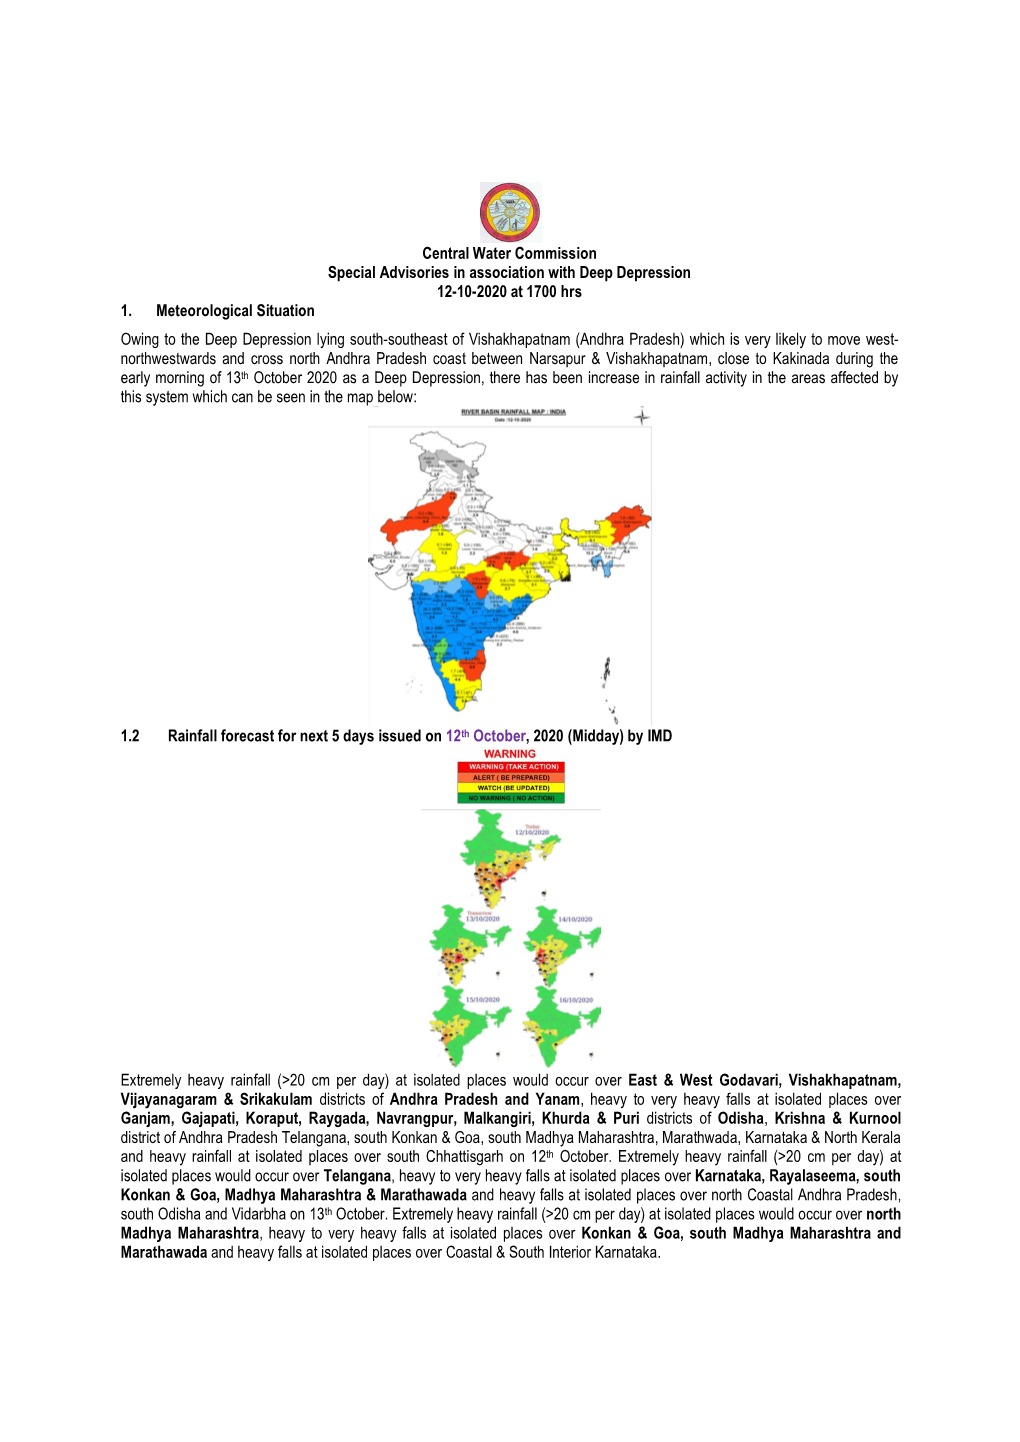 Central Water Commission Special Advisories in Association with Deep Depression 12-10-2020 at 1700 Hrs 1. Meteorological Situation